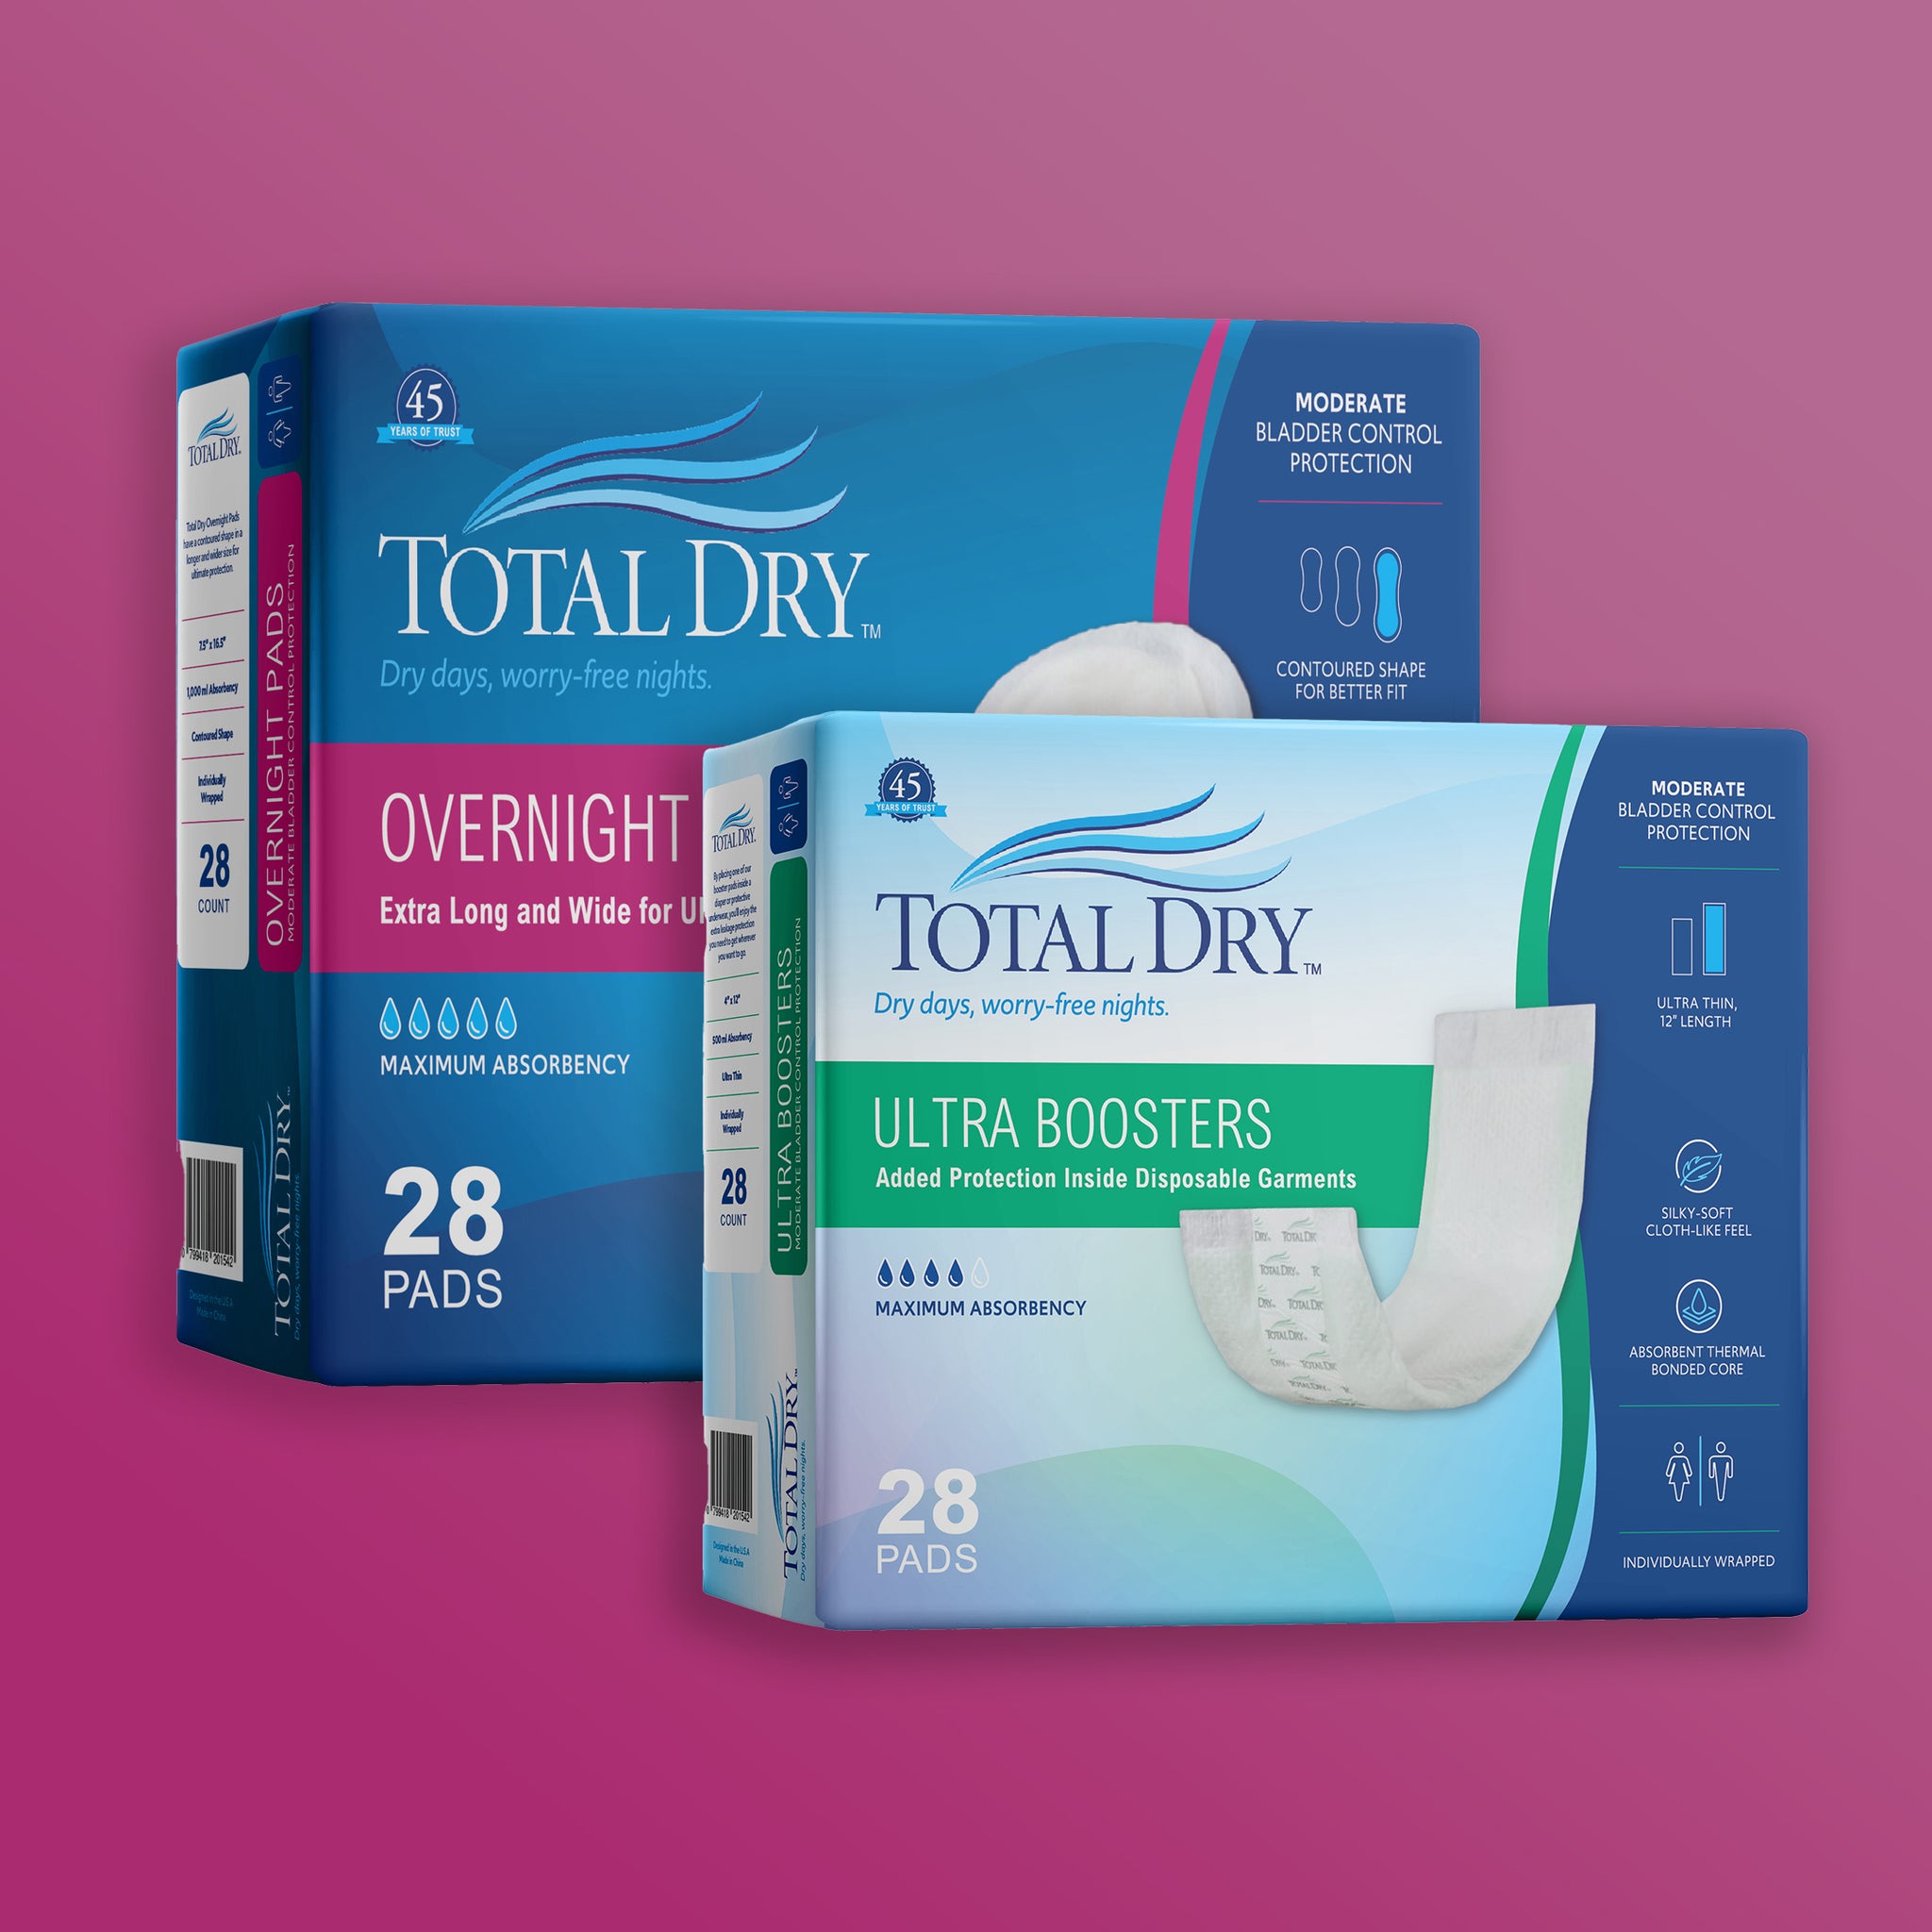 How Cancer Relates to Incontinence - TotalDry